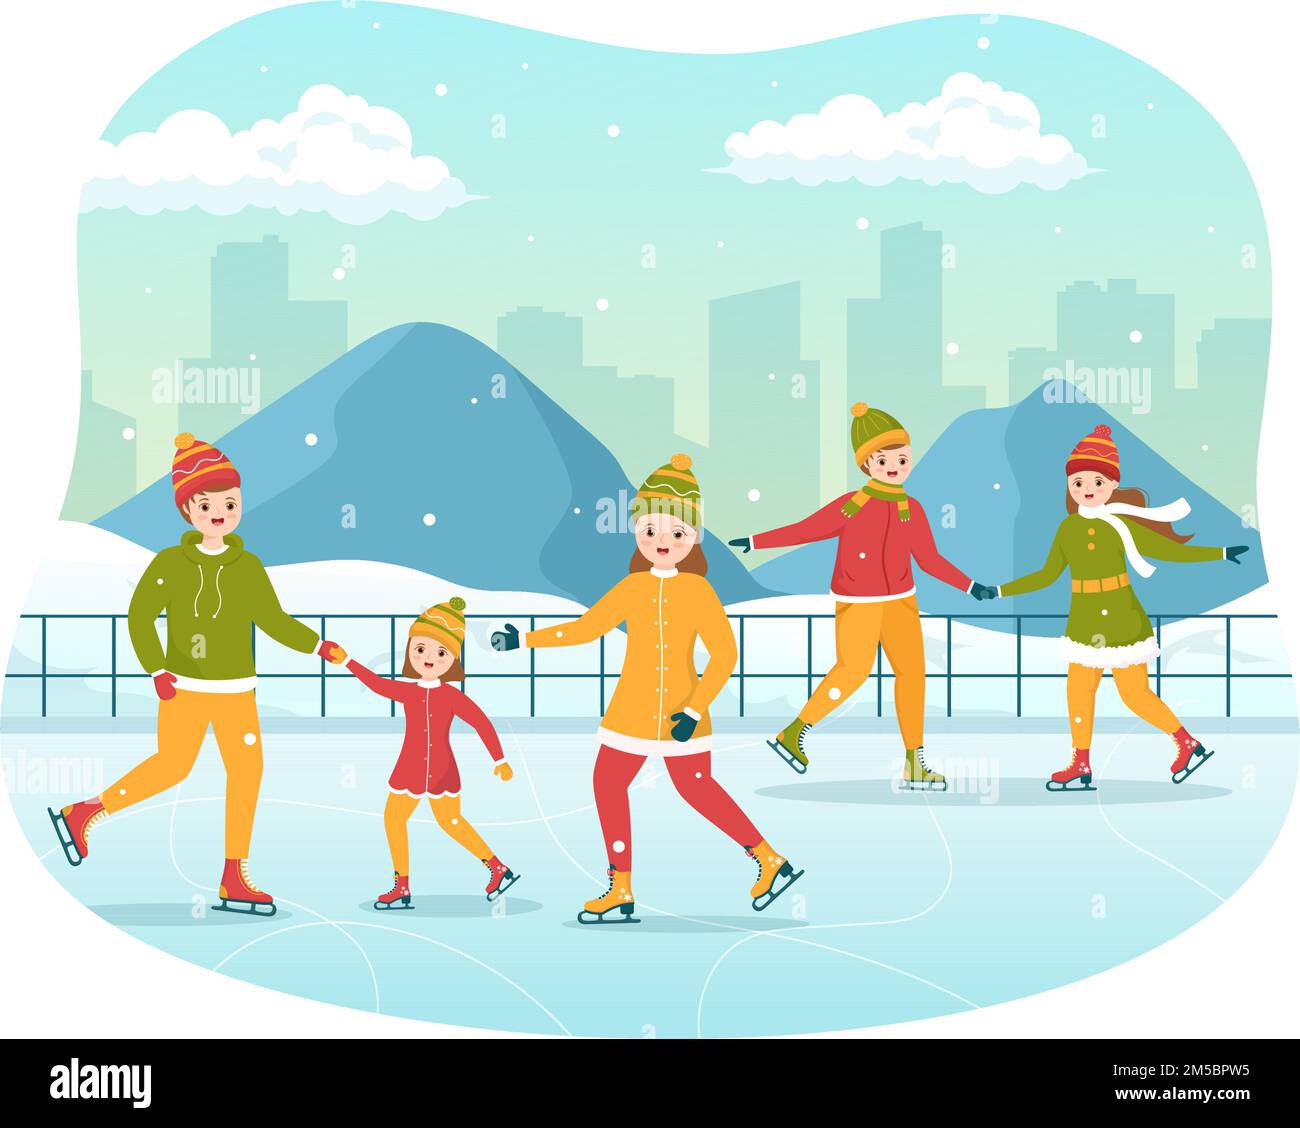 Men, Women and Kids Skating on Ice Rink Wearing Winter Clothes for Outdoor Activity in Flat Cartoon Hand Drawn Templates Illustration Stock Vector